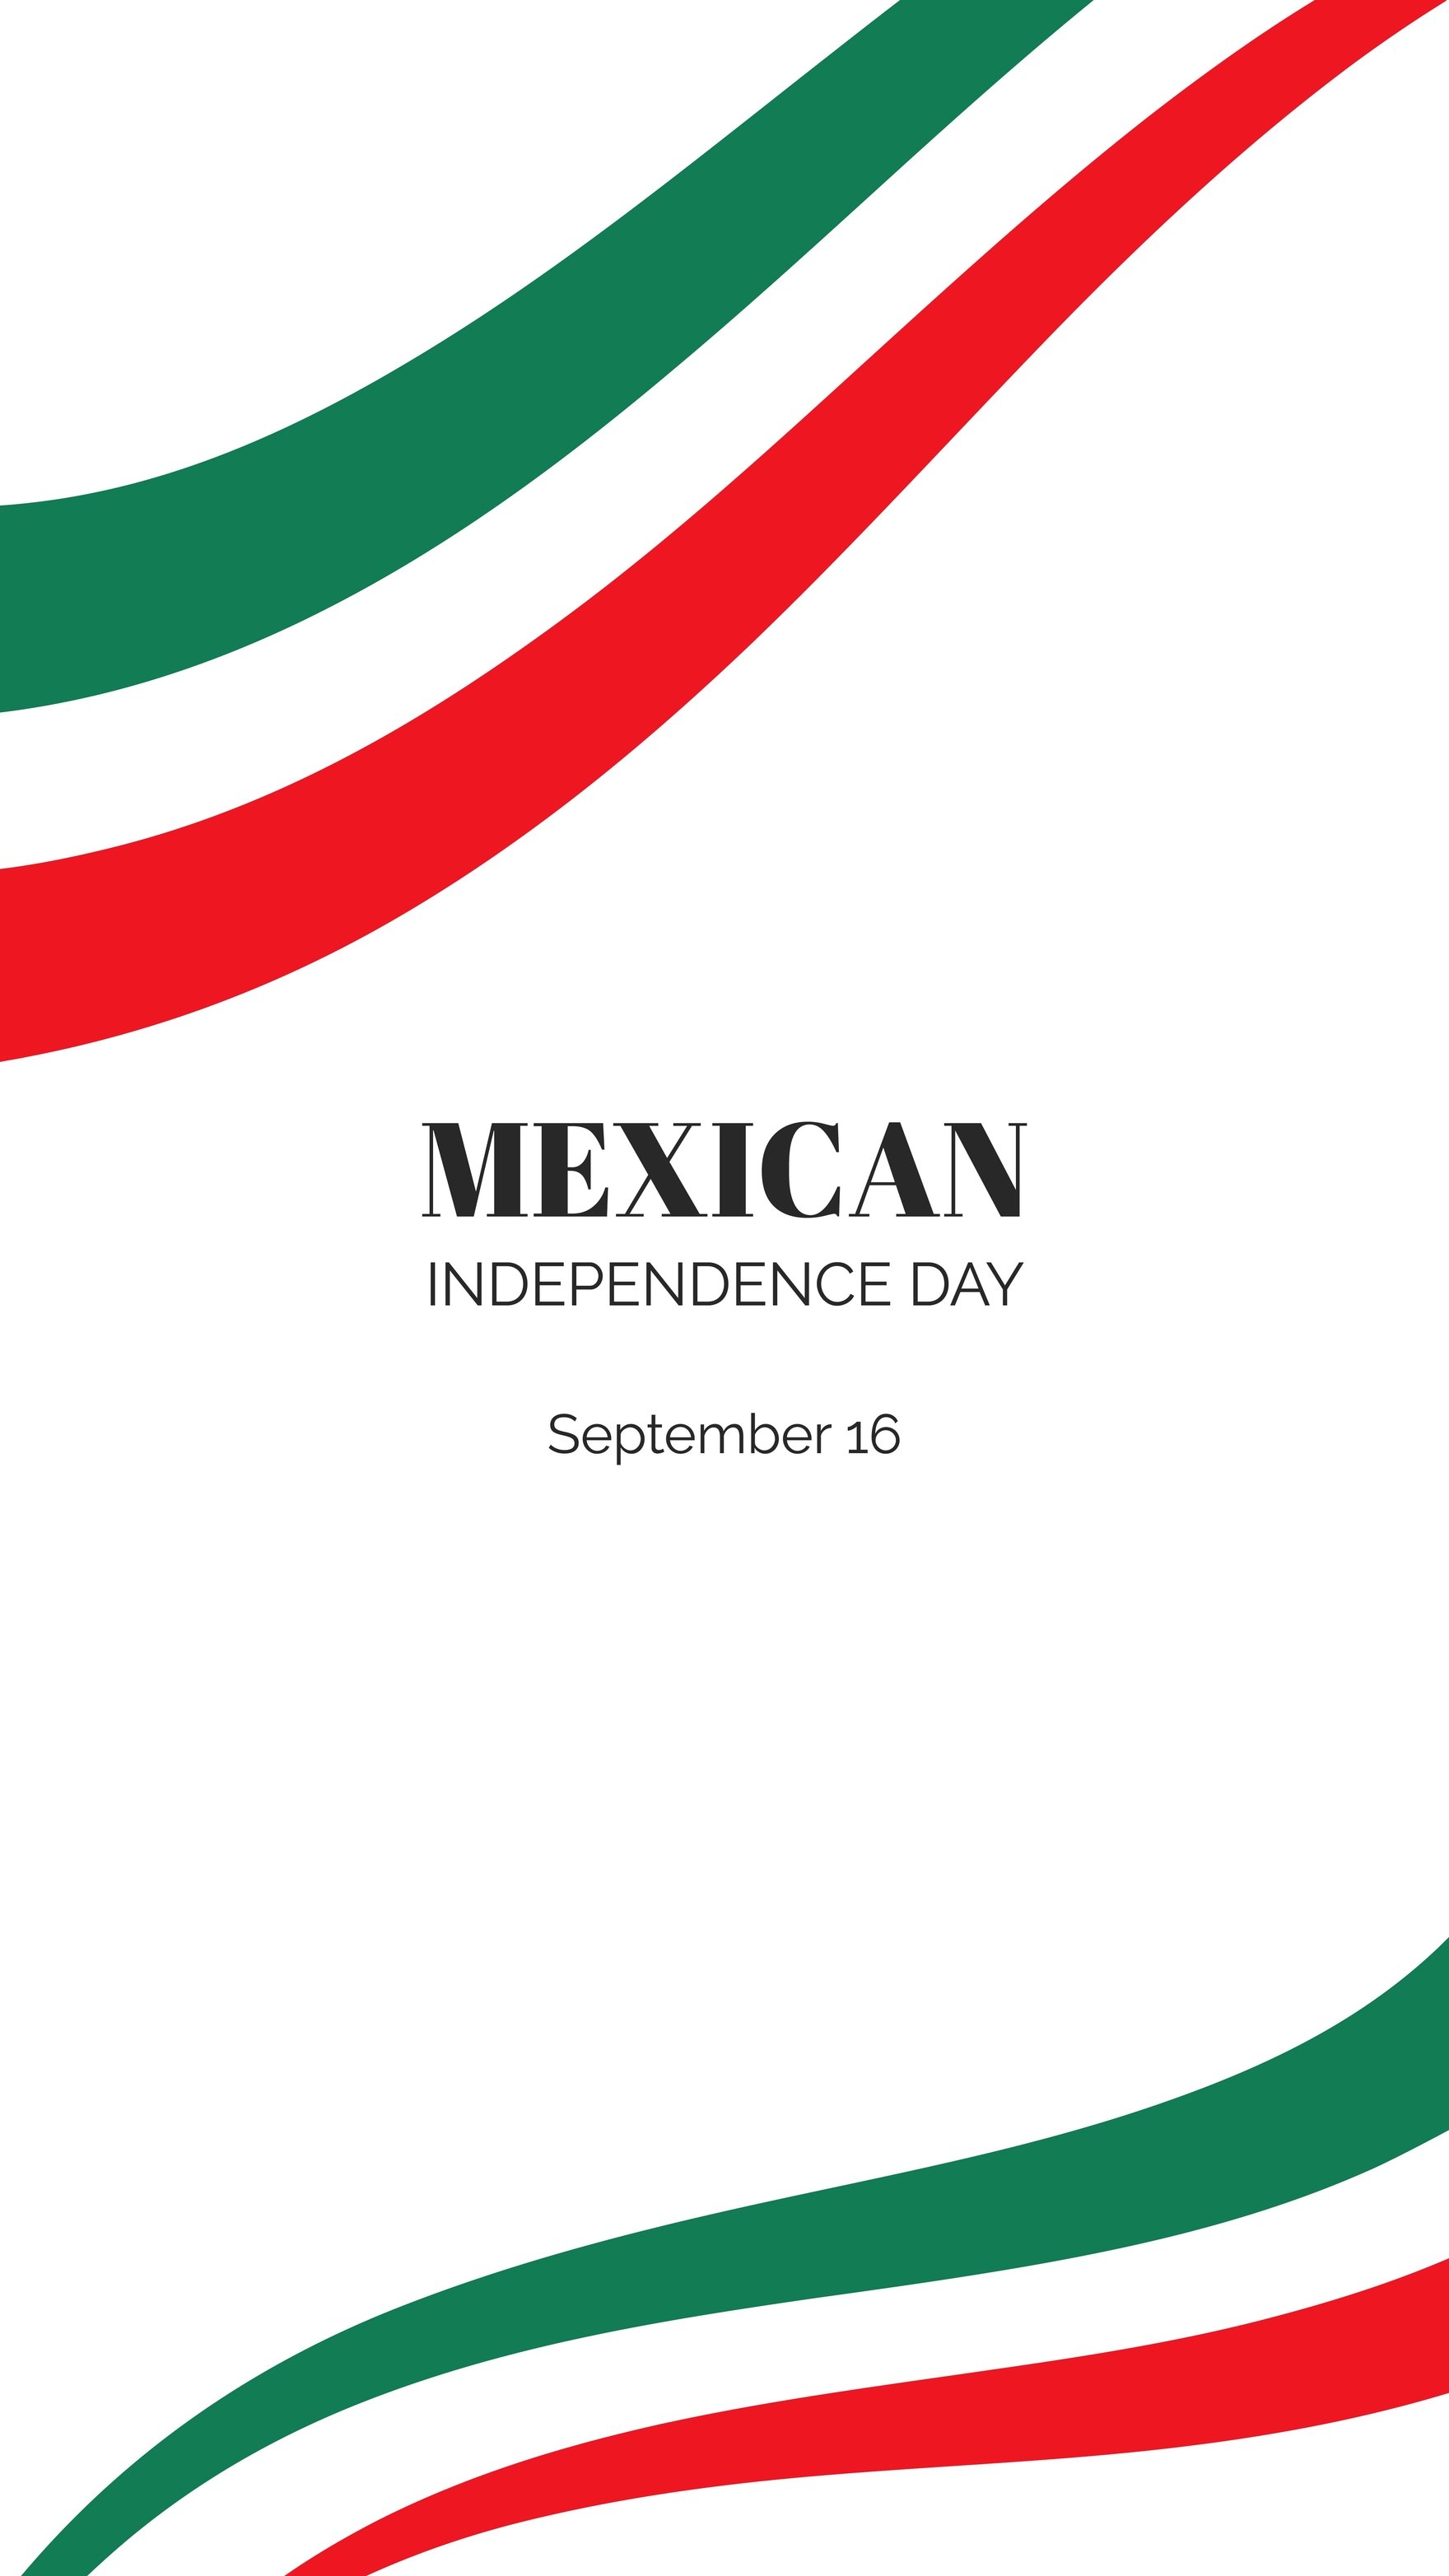 Independence Day Story Templates - Design, Free, Download | Template.net